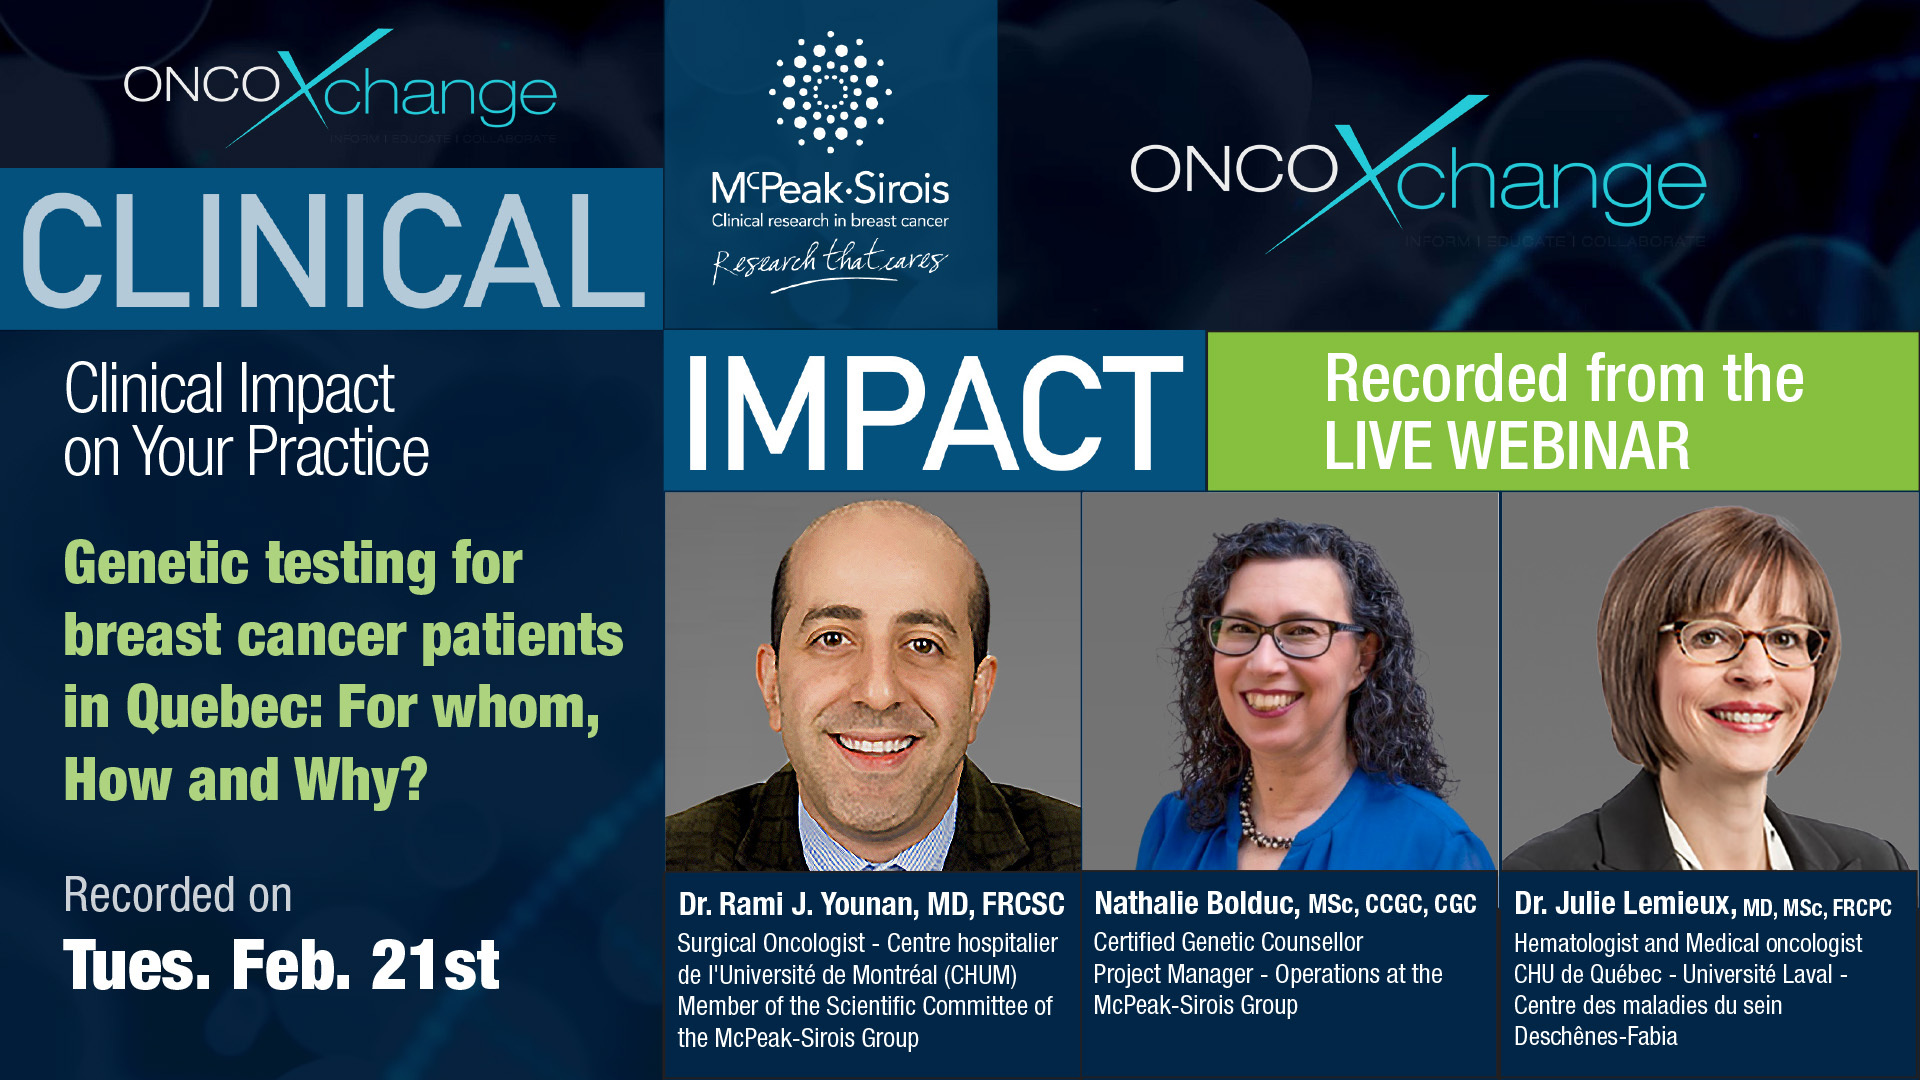 CLINICAL IMPACT - Genetic testing for breast cancer patients in Quebec: Why, how and whom?